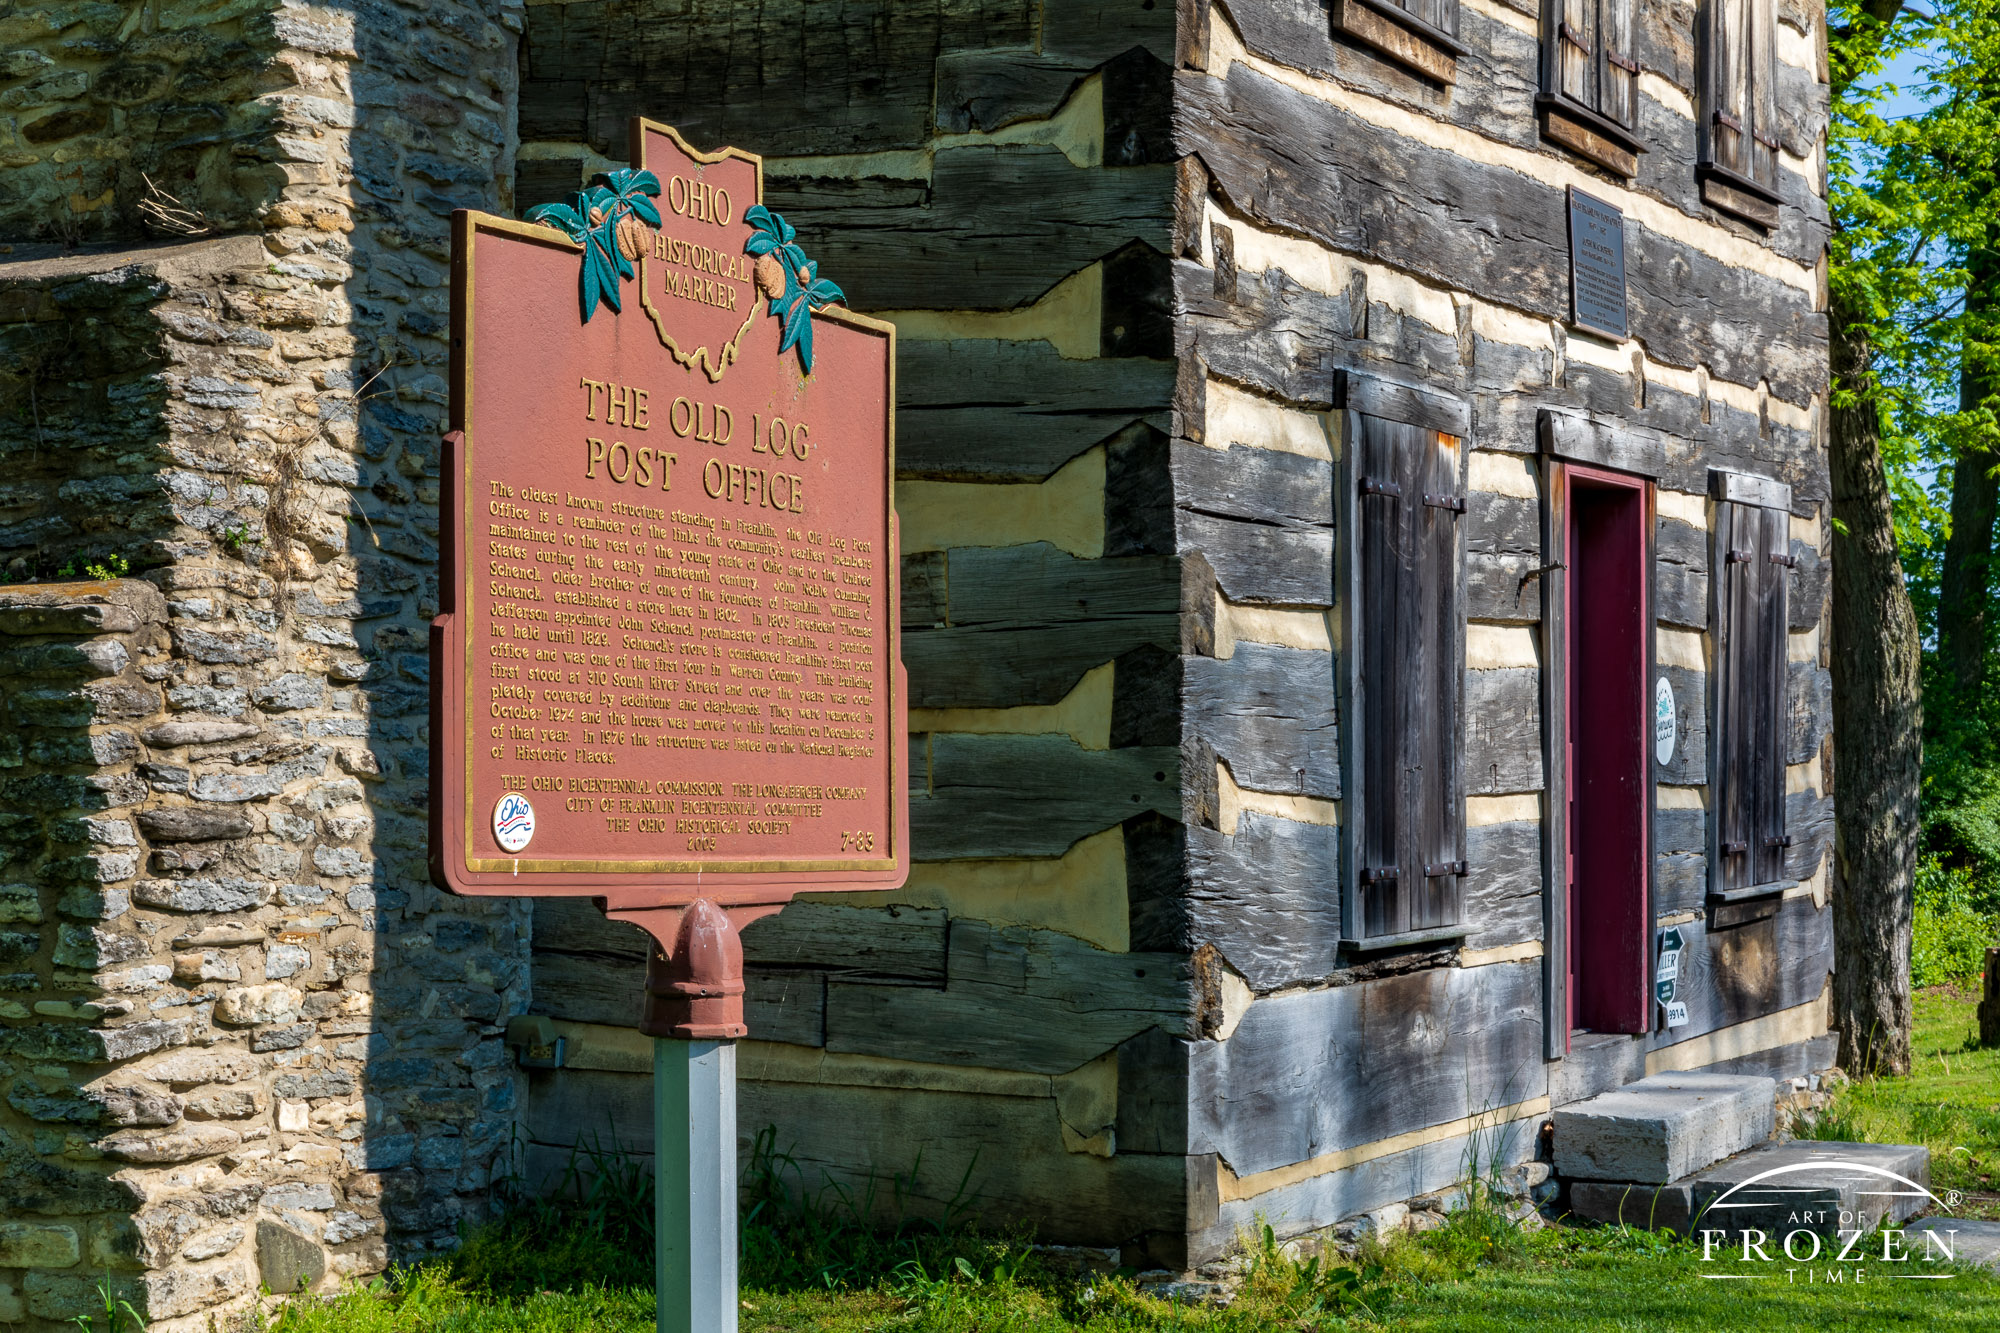 A historical sign sharing the history of the adjacent original log home which stands as Franklin Ohio’s oldest building and former post office